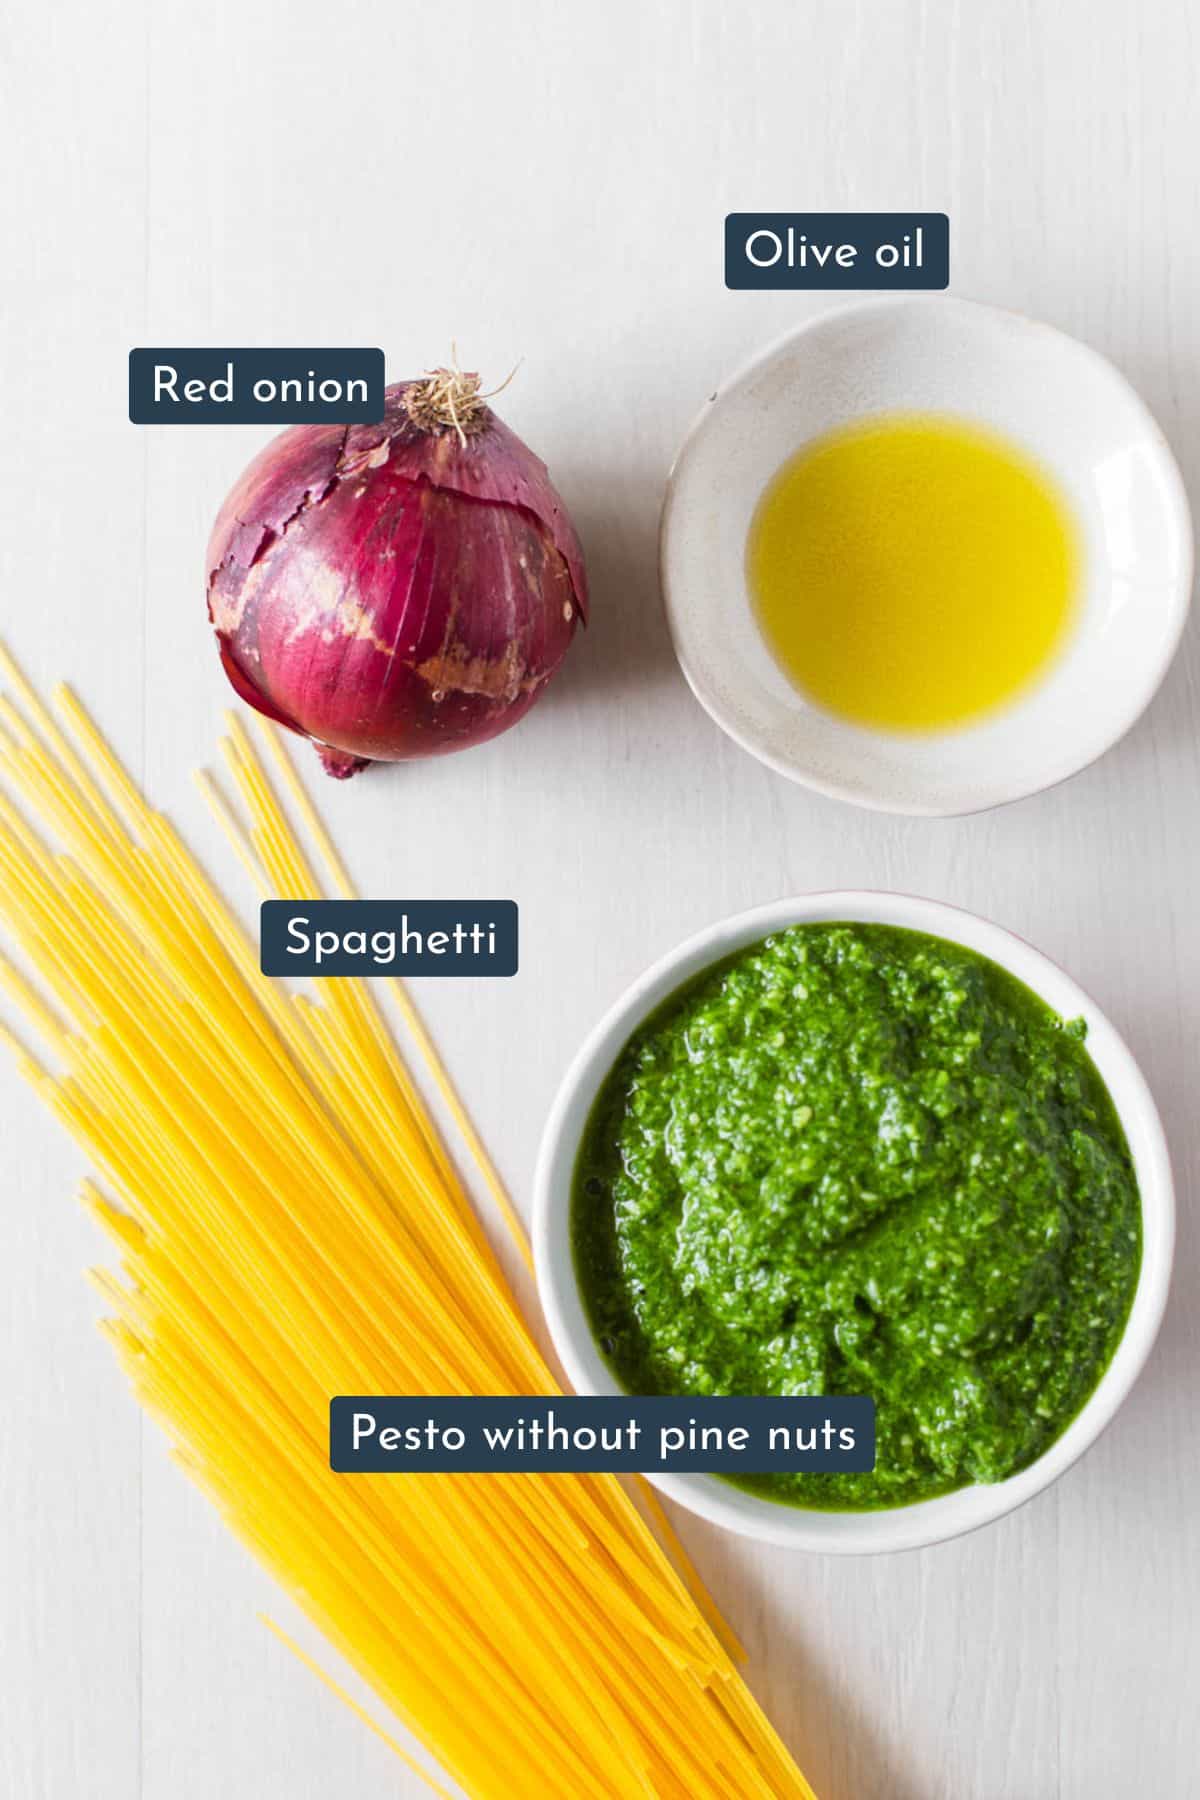 Individual ingredients laid out to make pasta al pesto are spaghetti, pesto sauce, red onion and oil.